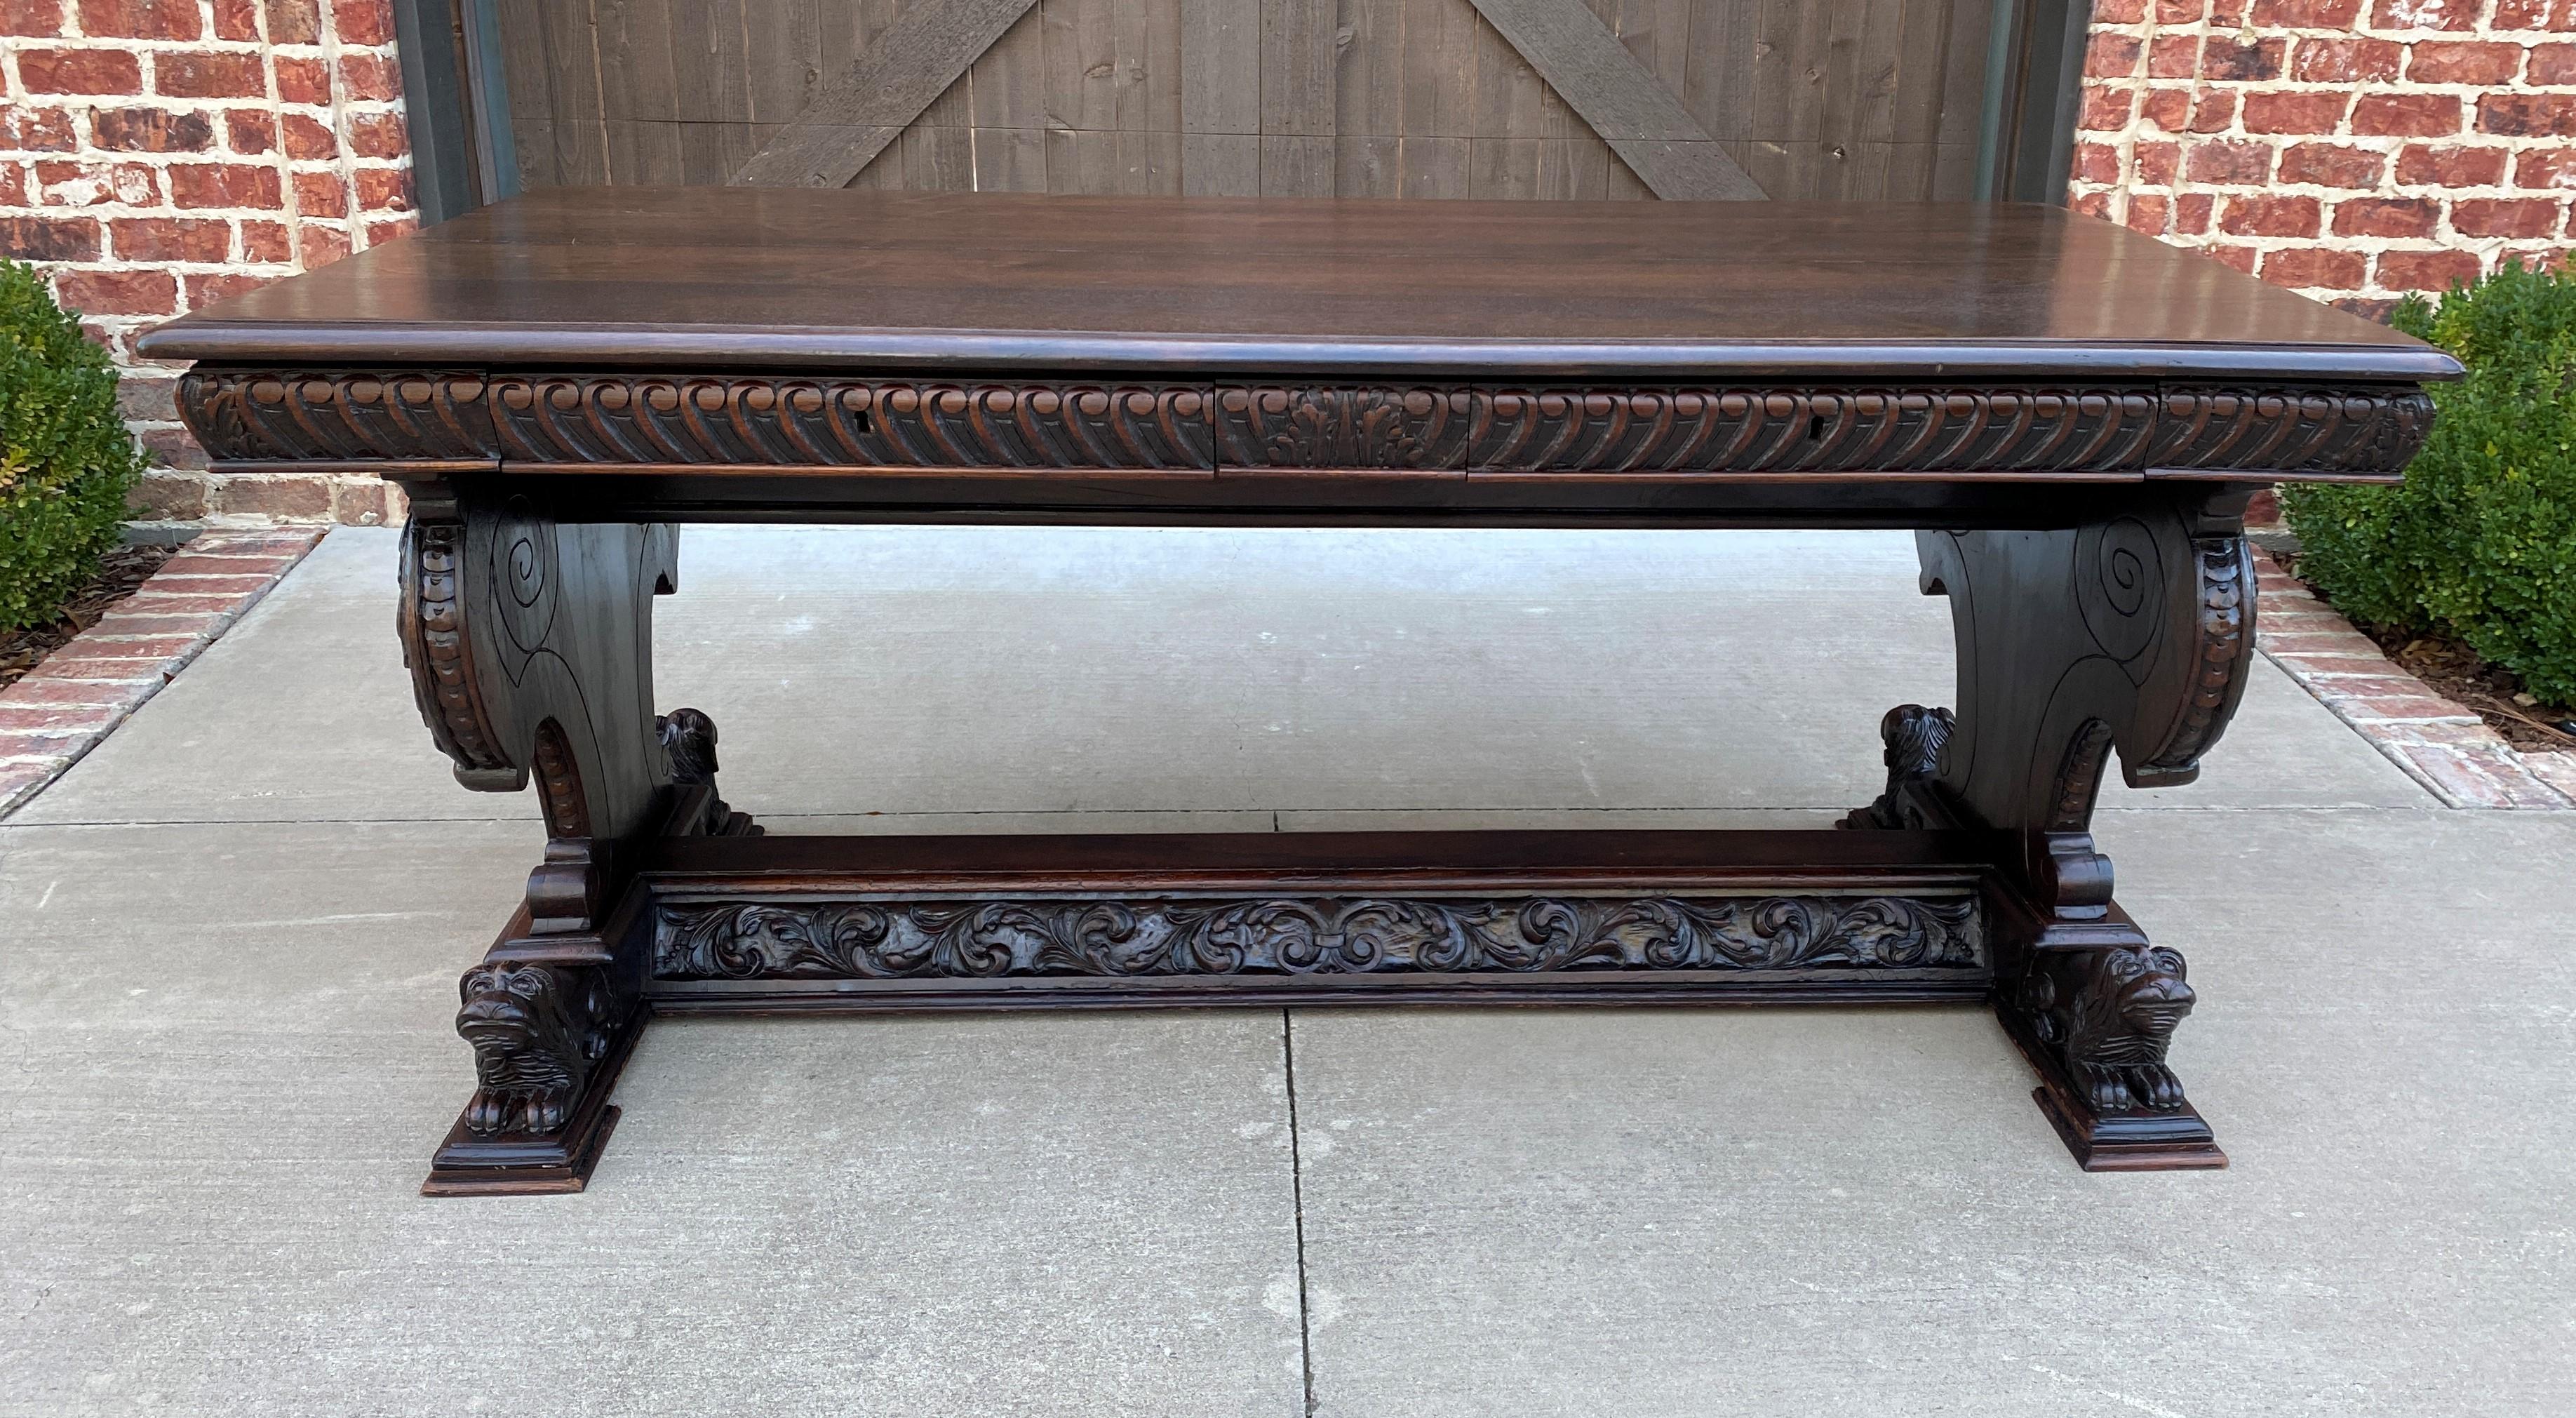 Exquisite antique French oak renaissance revival desk, library or conference table, or dining table~~c. 1860s 

This versatile executive desk or table makes quite the statement~~Highly carved French flourish accents on all four sides resting on